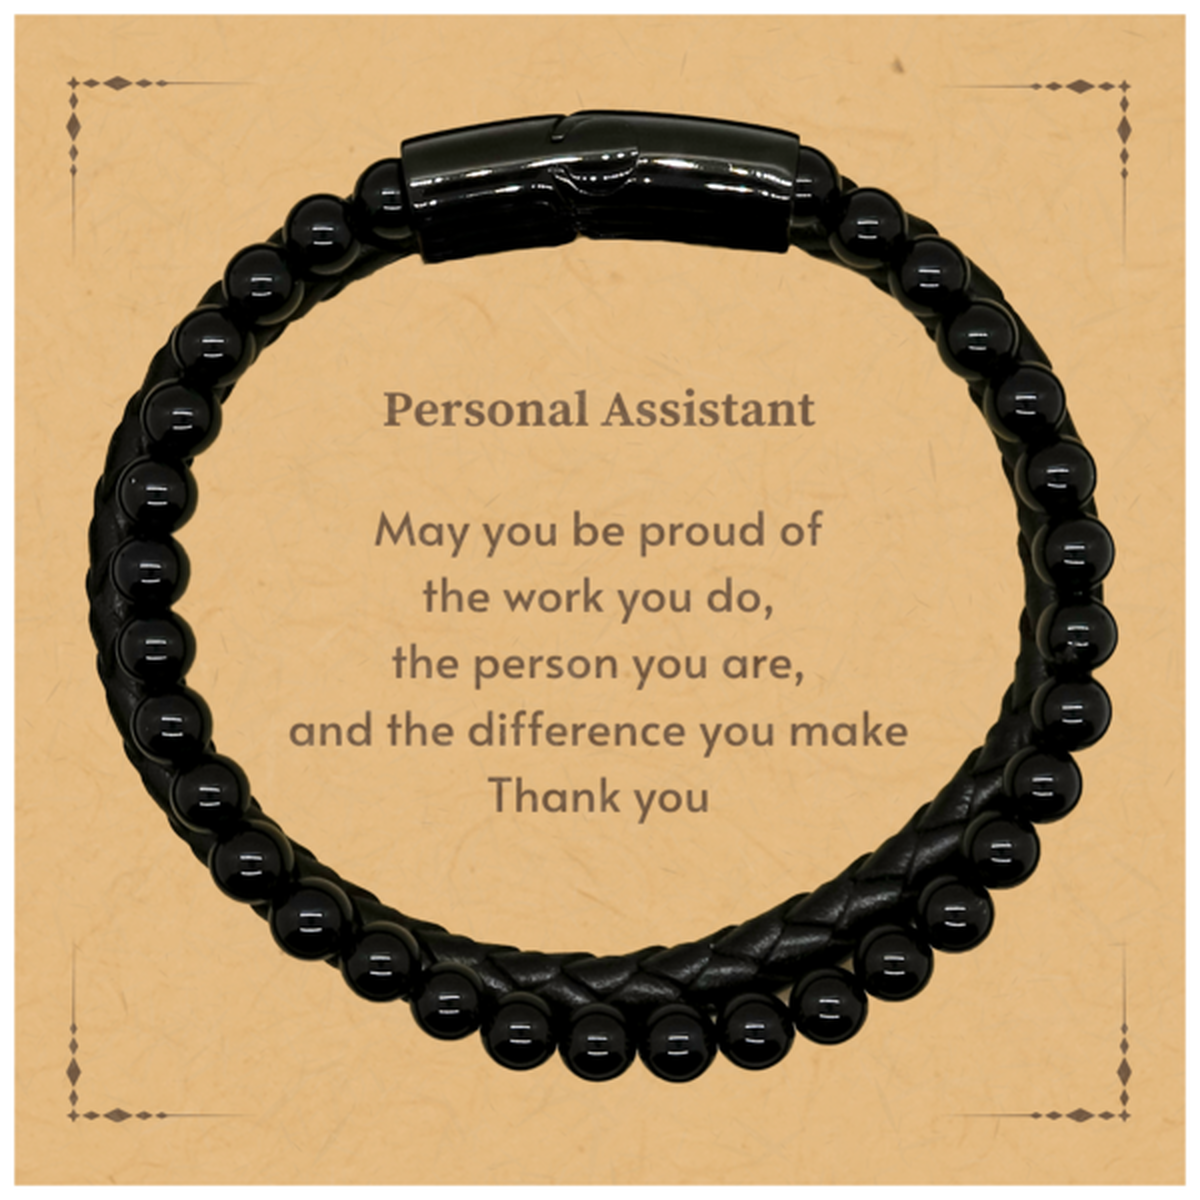 Heartwarming Stone Leather Bracelets Retirement Coworkers Gifts for Personal Assistant, Personal Assistant May You be proud of the work you do, the person you are Gifts for Boss Men Women Friends